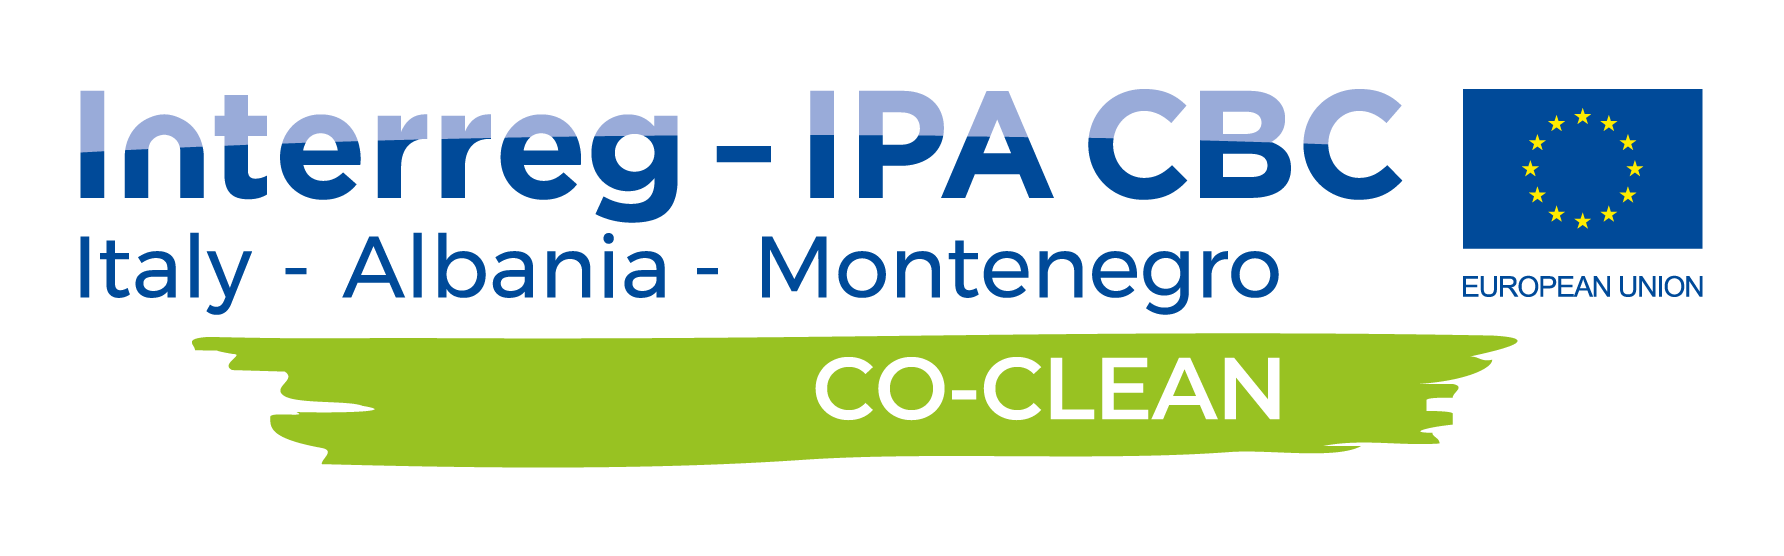 CO-CLEAN footer logo